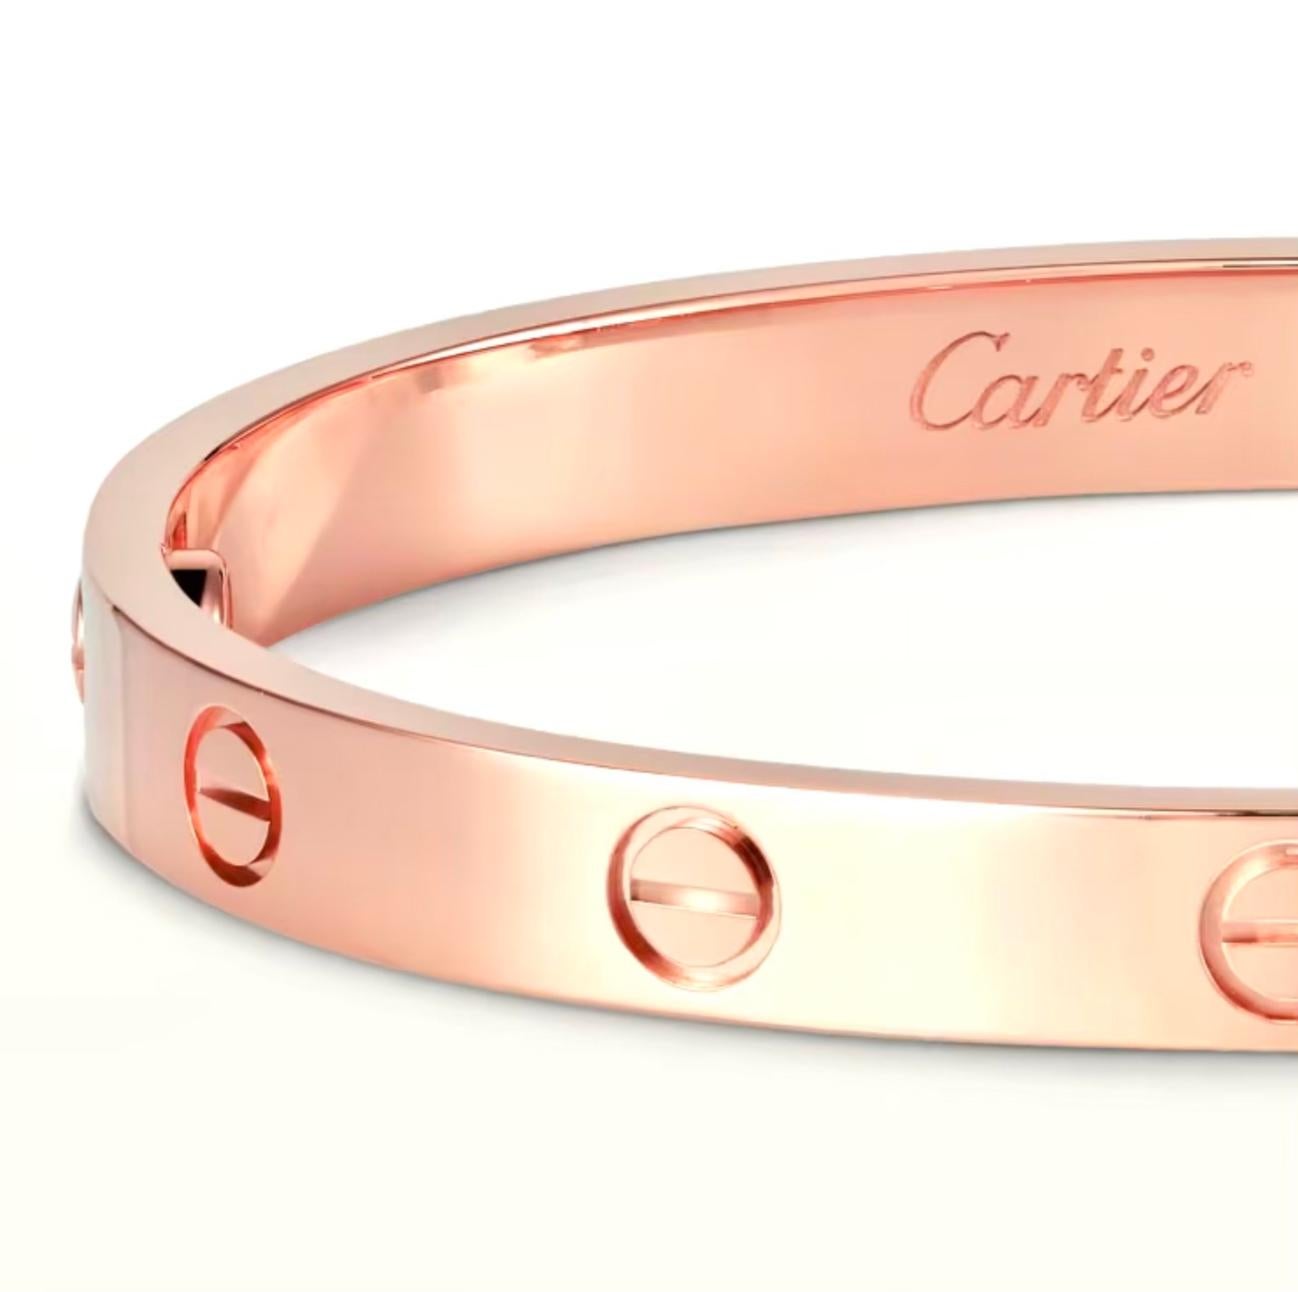 Designer: Cartier

Collection:  Love

Style: Bangle

Metal: Rose Gold 

Metal Purity: 18K 

Screw Style System: New Screw System 

Bracelet Size: 16 = 16 cm

Hallmarks: Cartier; Serial #, 750

Includes:  24 Months Brilliance Jewels Warranty

       